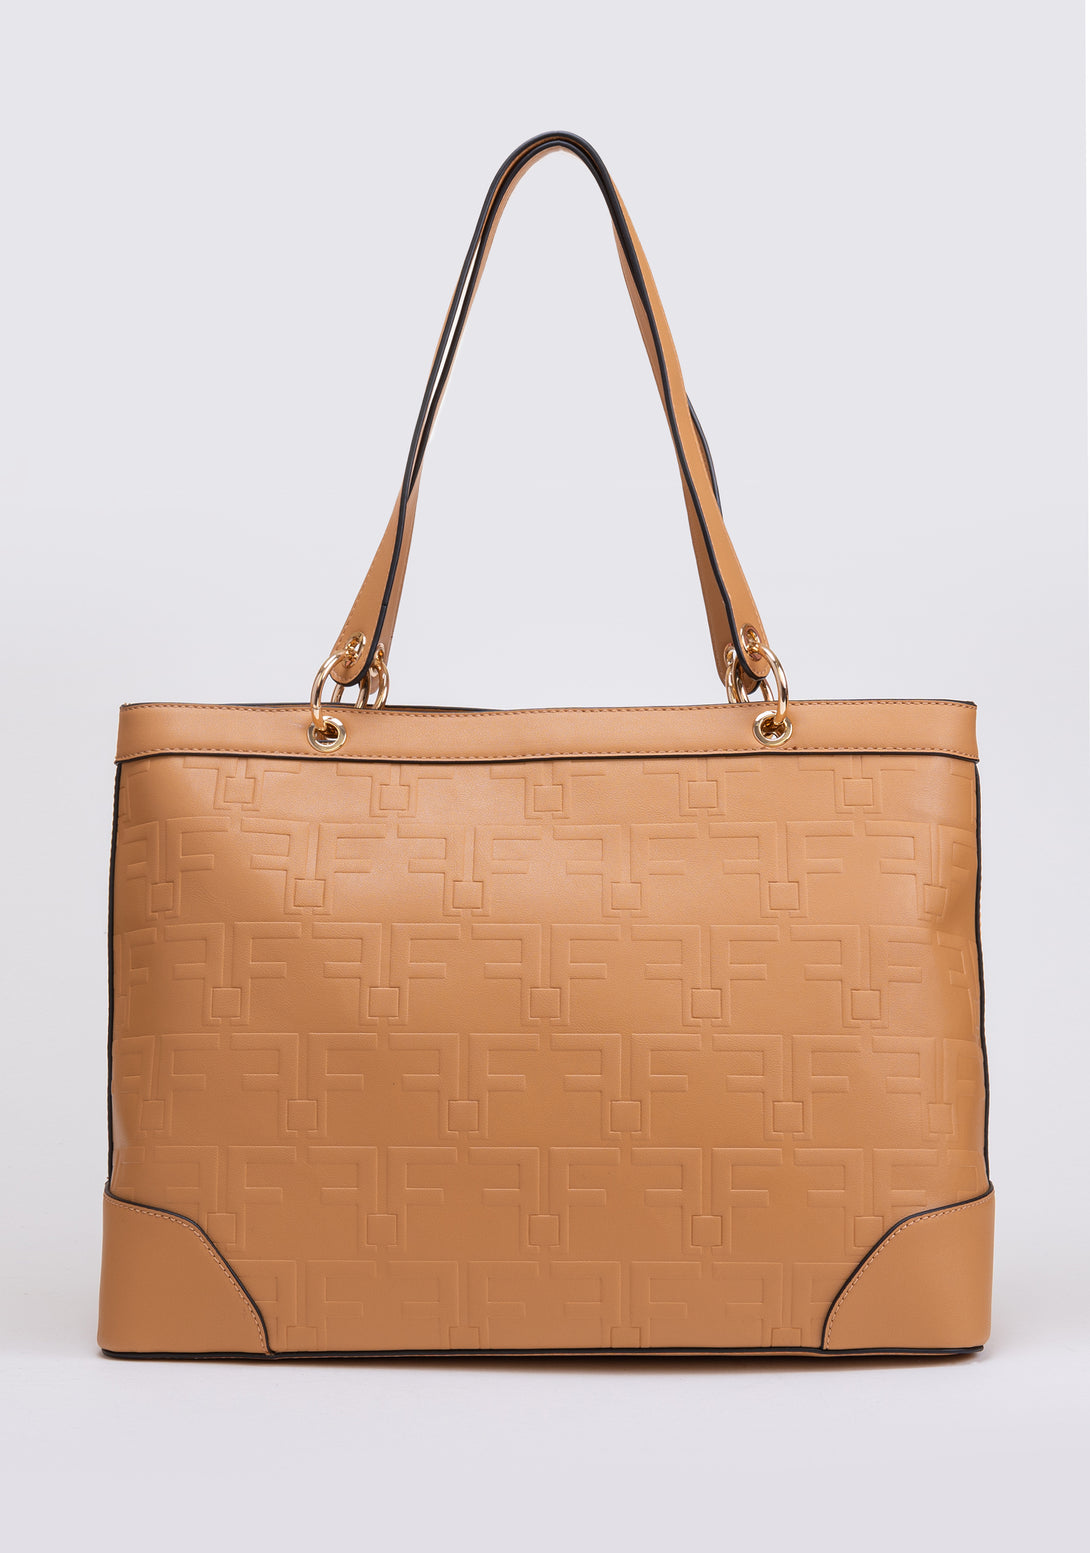 Shopping bag made in eco leather with logo